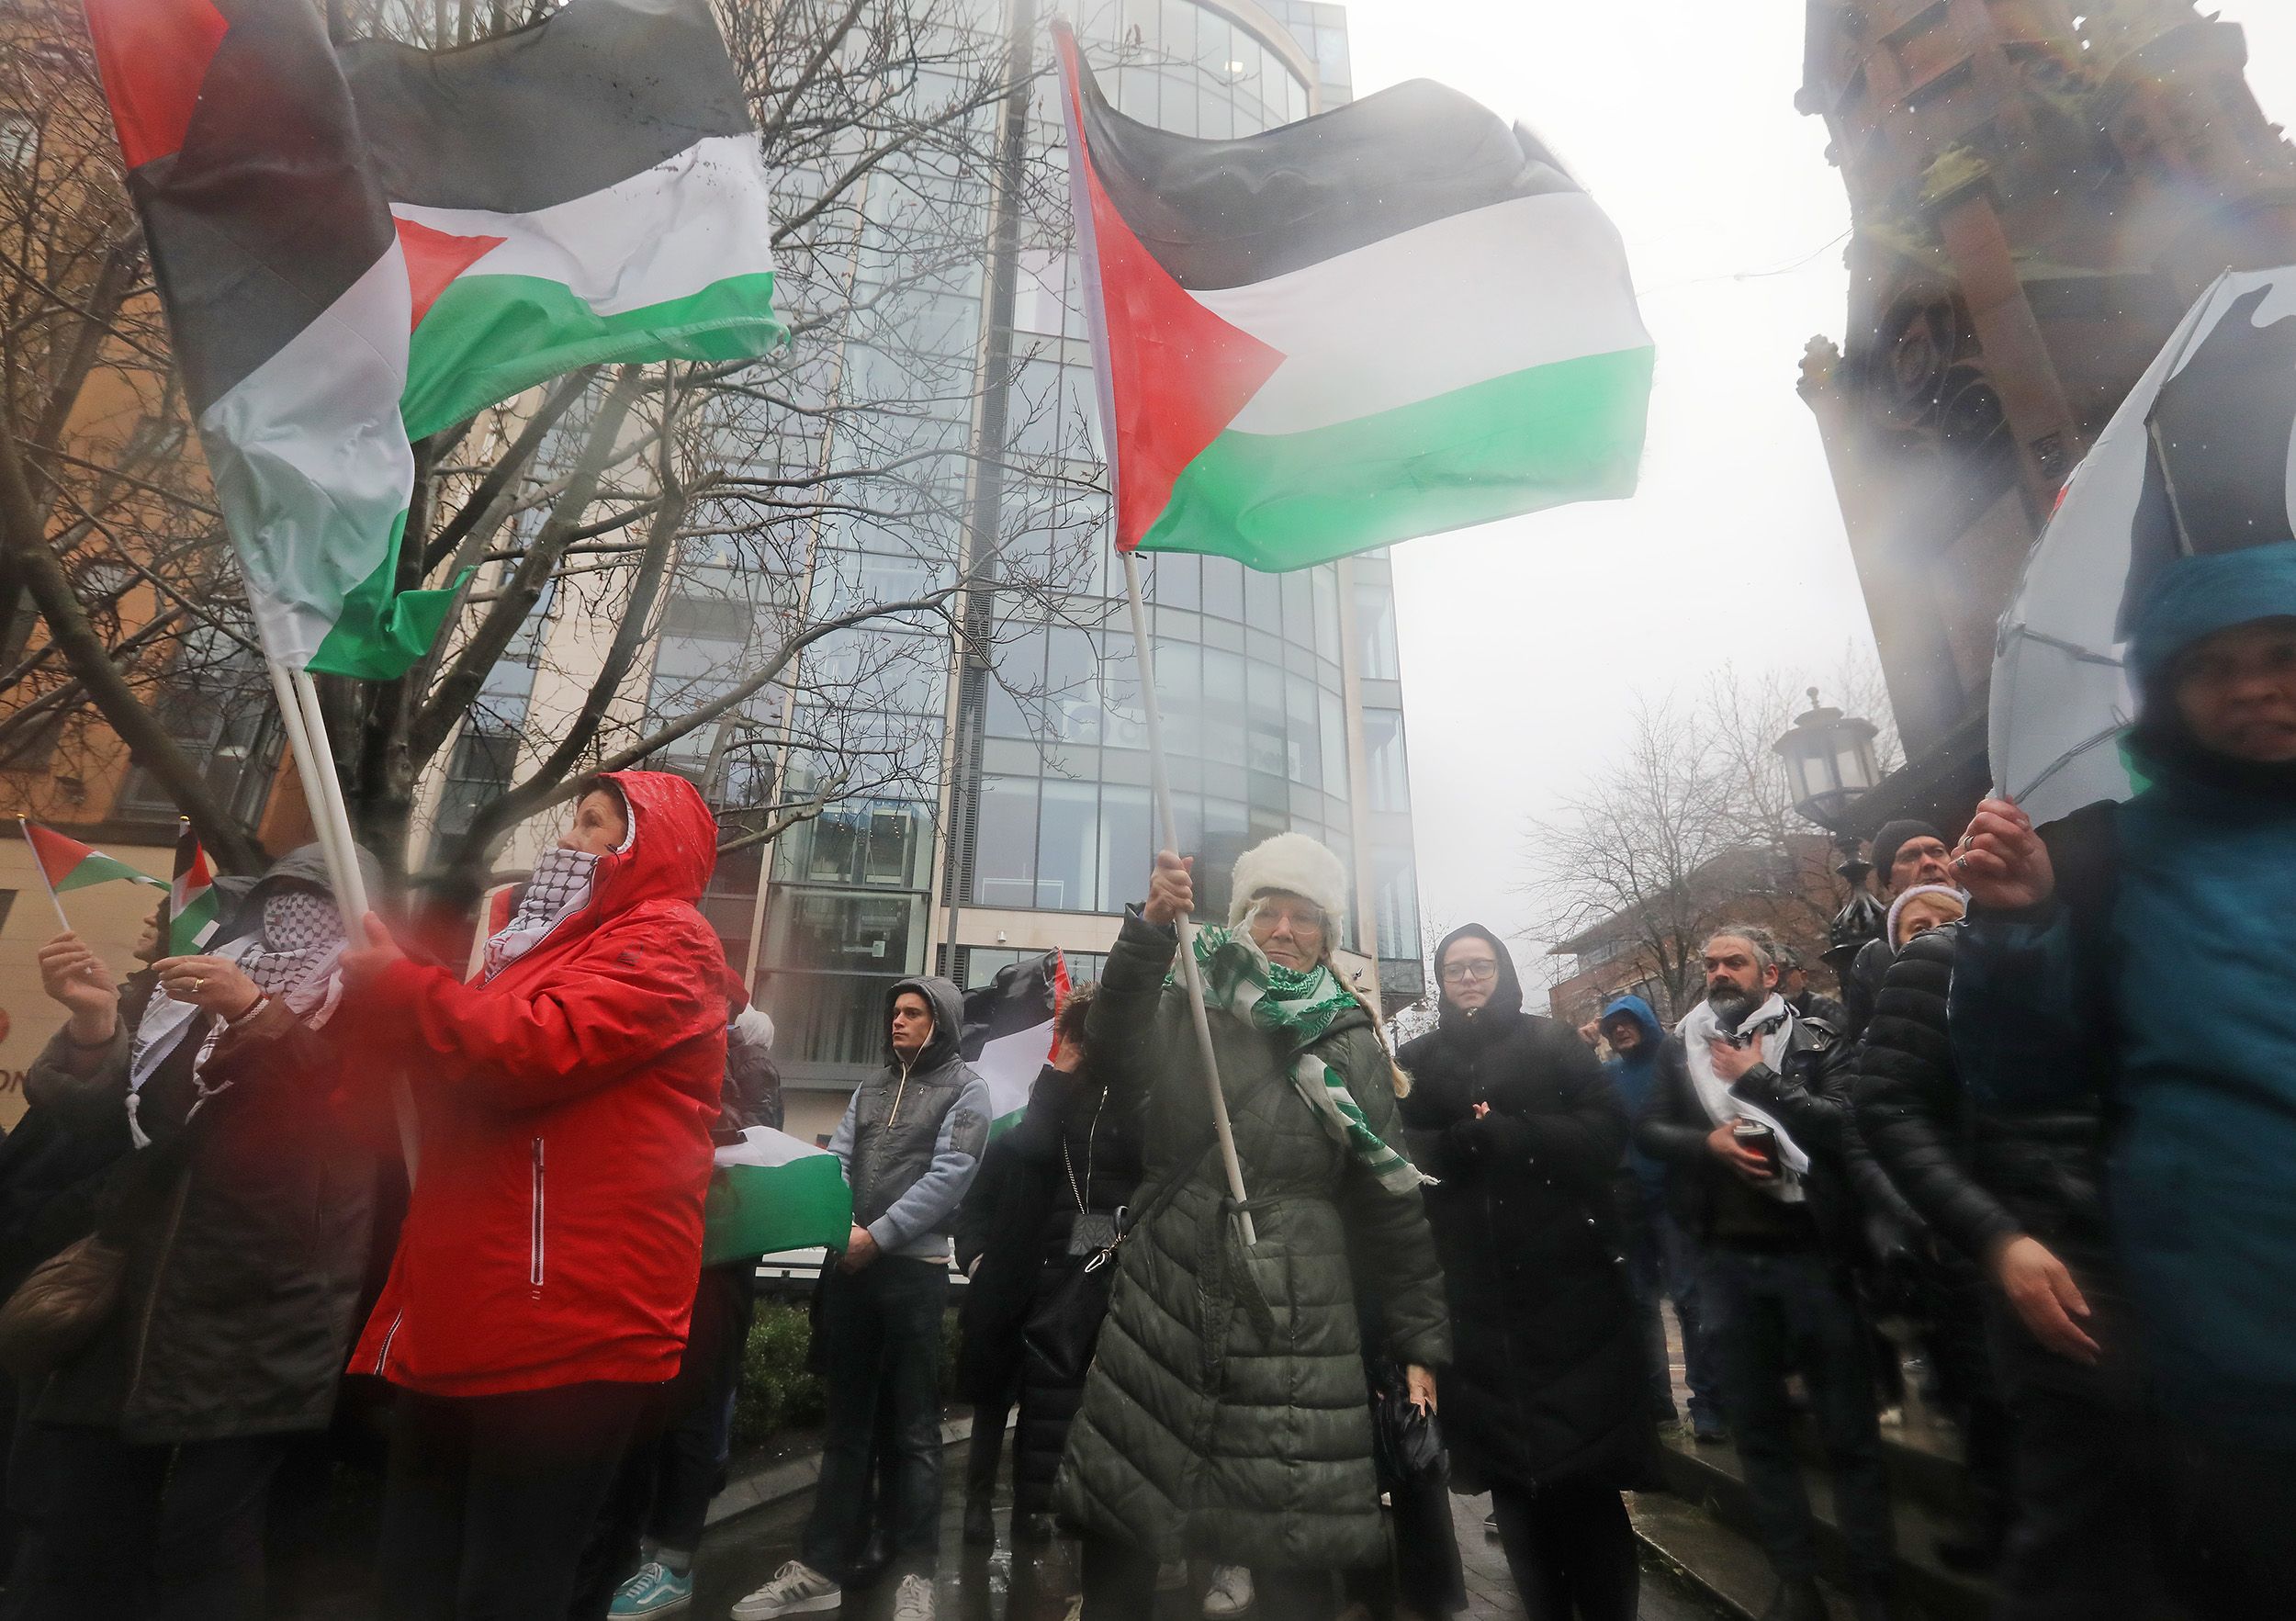 NO MORE: There were more demonstration in Belfast on Saturday in support of Gaza and demanding a ceasefire